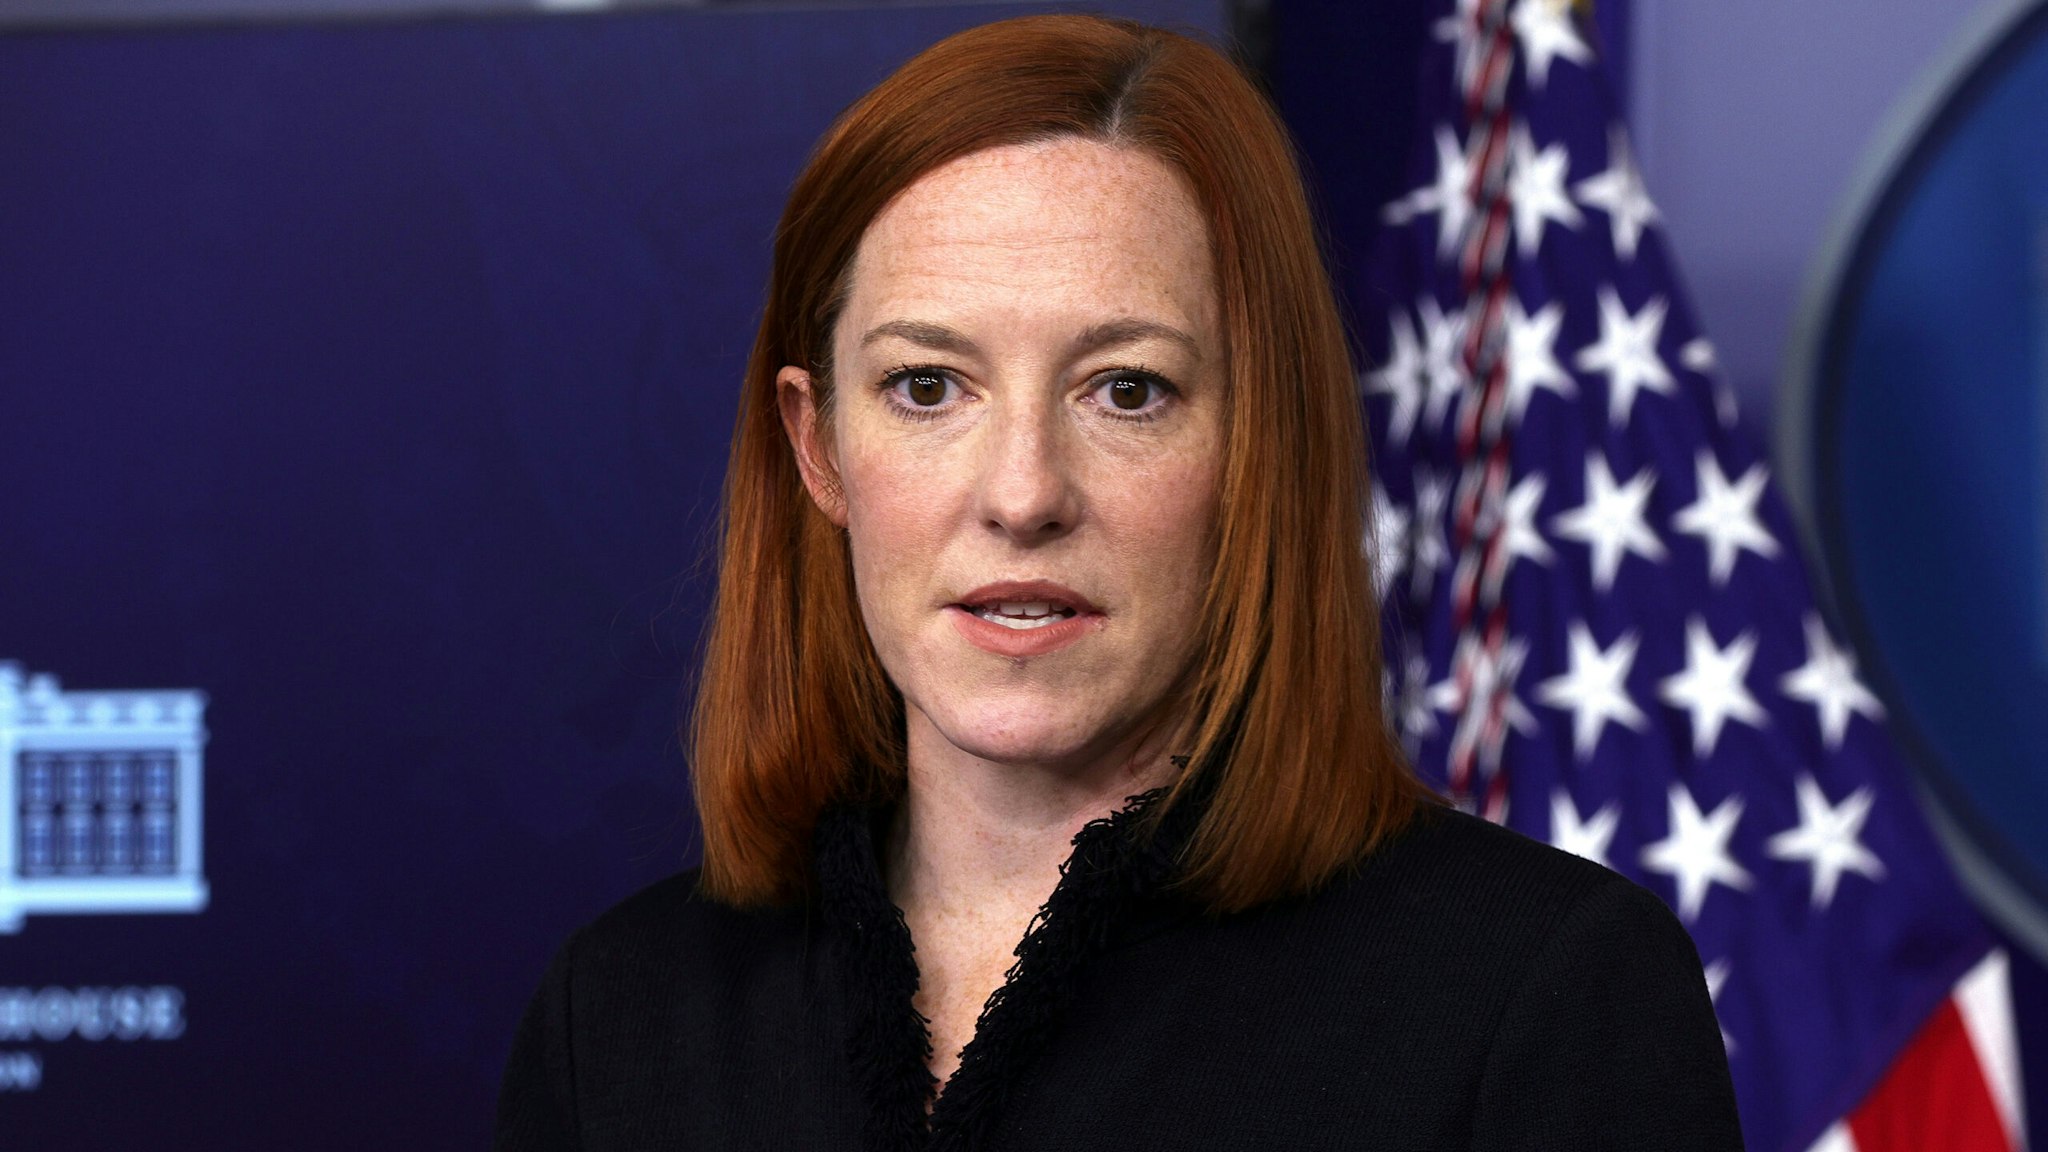 WASHINGTON, DC - FEBRUARY 11: White House Press Secretary Jen Psaki speaks during a news briefing at the James Brady Press Briefing Room of the White House February 11, 2021 in Washington, DC. Psaki held a news briefing to answer questions from the members of the press.